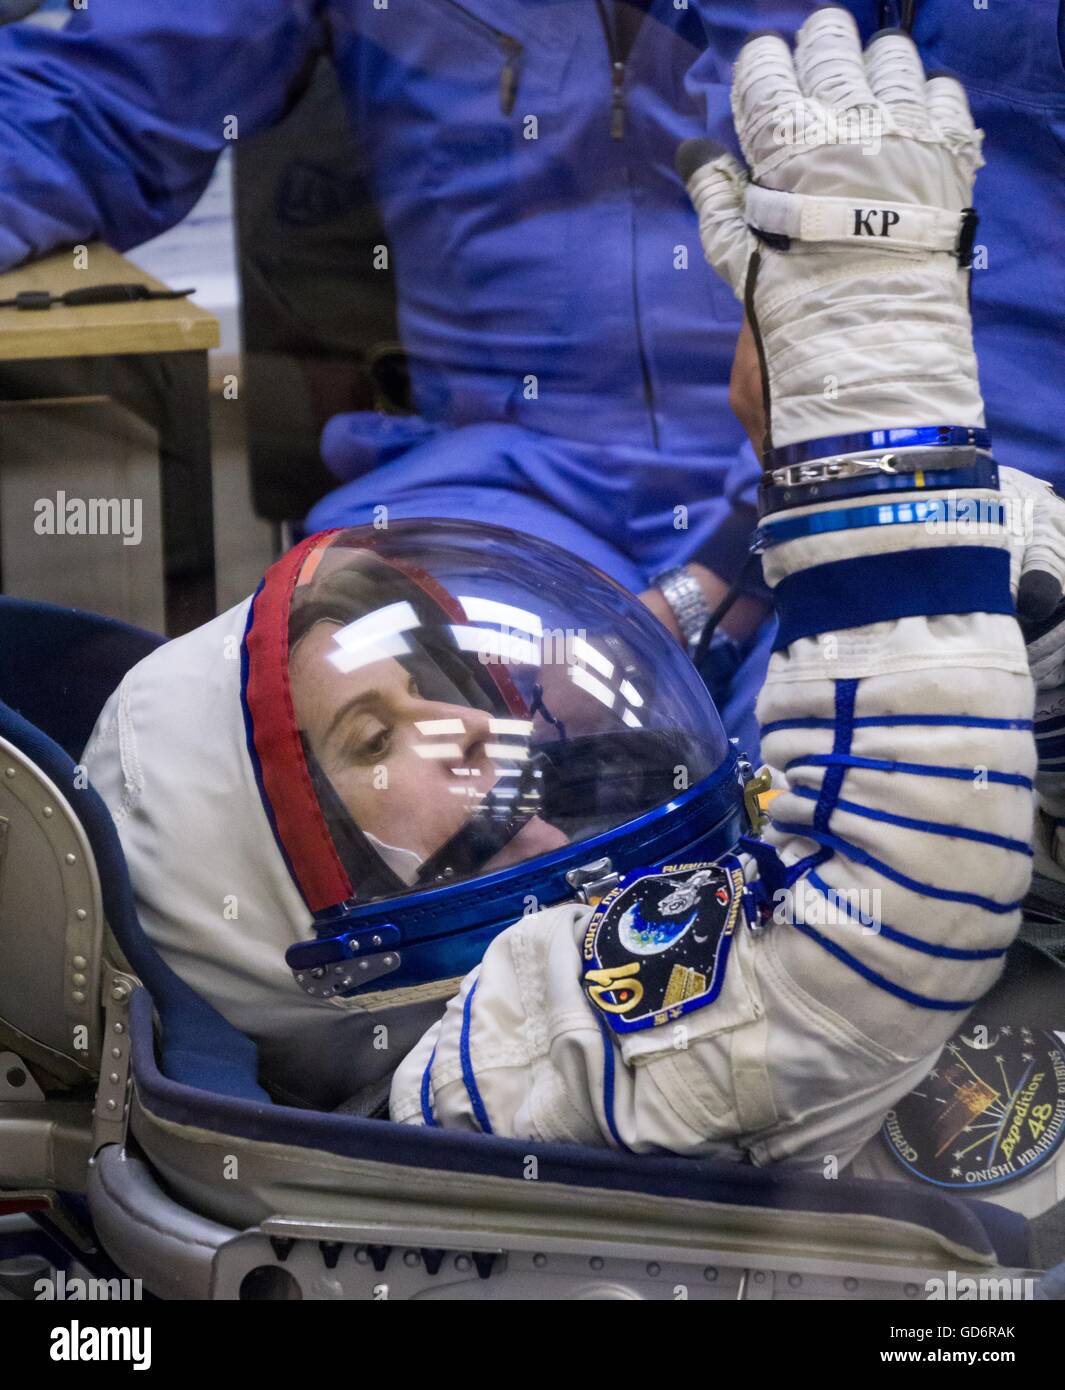 International Space Station Expedition 48 American astronaut Kate Rubins is suited up in her Russian Sokol launch and entry suit in preparation for launch July 7, 2016 at the Baikonur Cosmodrome in Kazakhstan. Rubens joins crew members Russian cosmonaut Anatoly Ivanishin and Japanese astronaut Takuya Onishi on four-month mission. Stock Photo